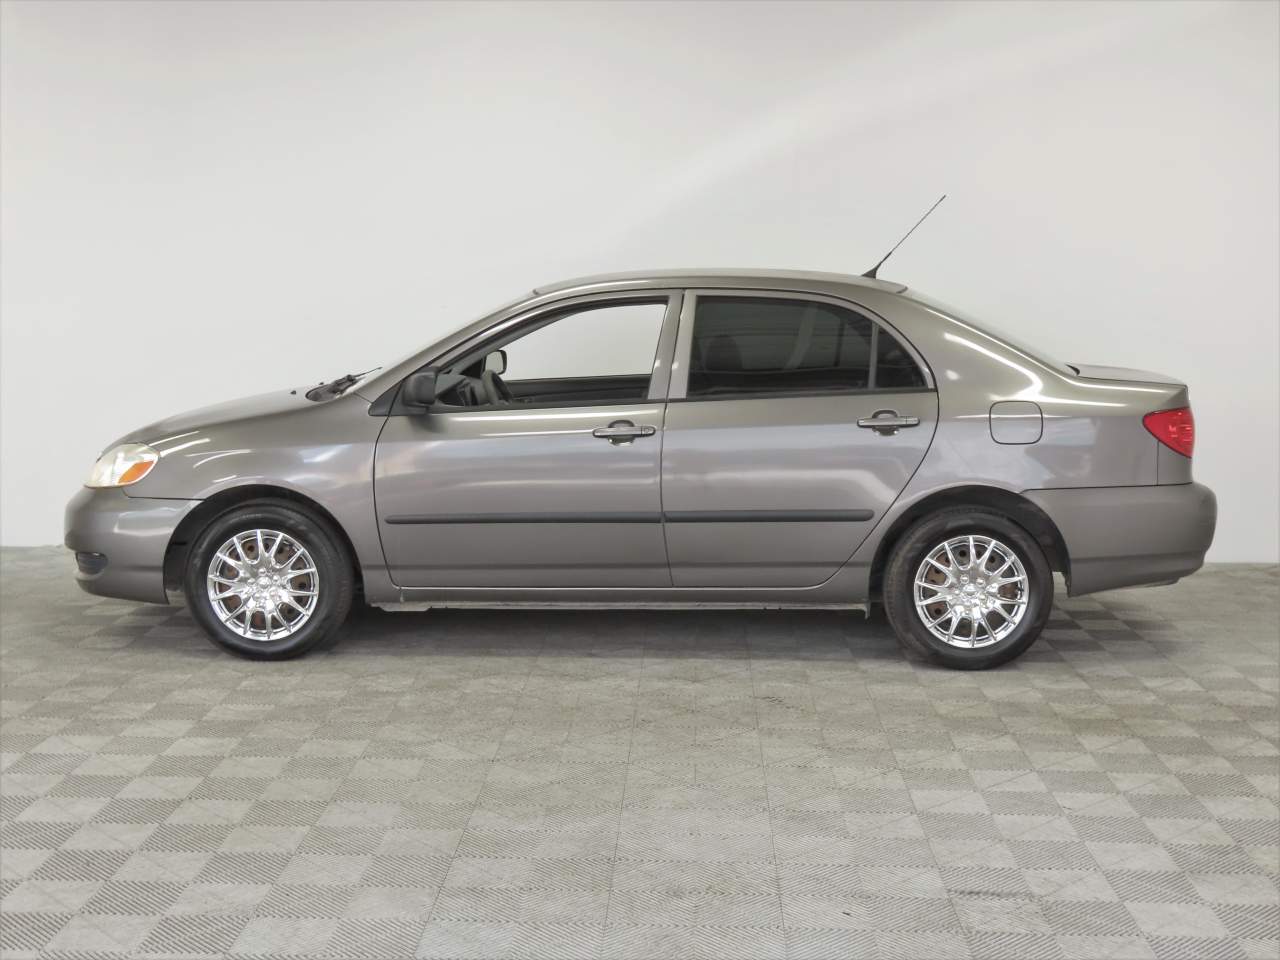 Used 2007 Toyota Corolla S with VIN 1NXBR32E77Z770462 for sale in Scottsdale, AZ